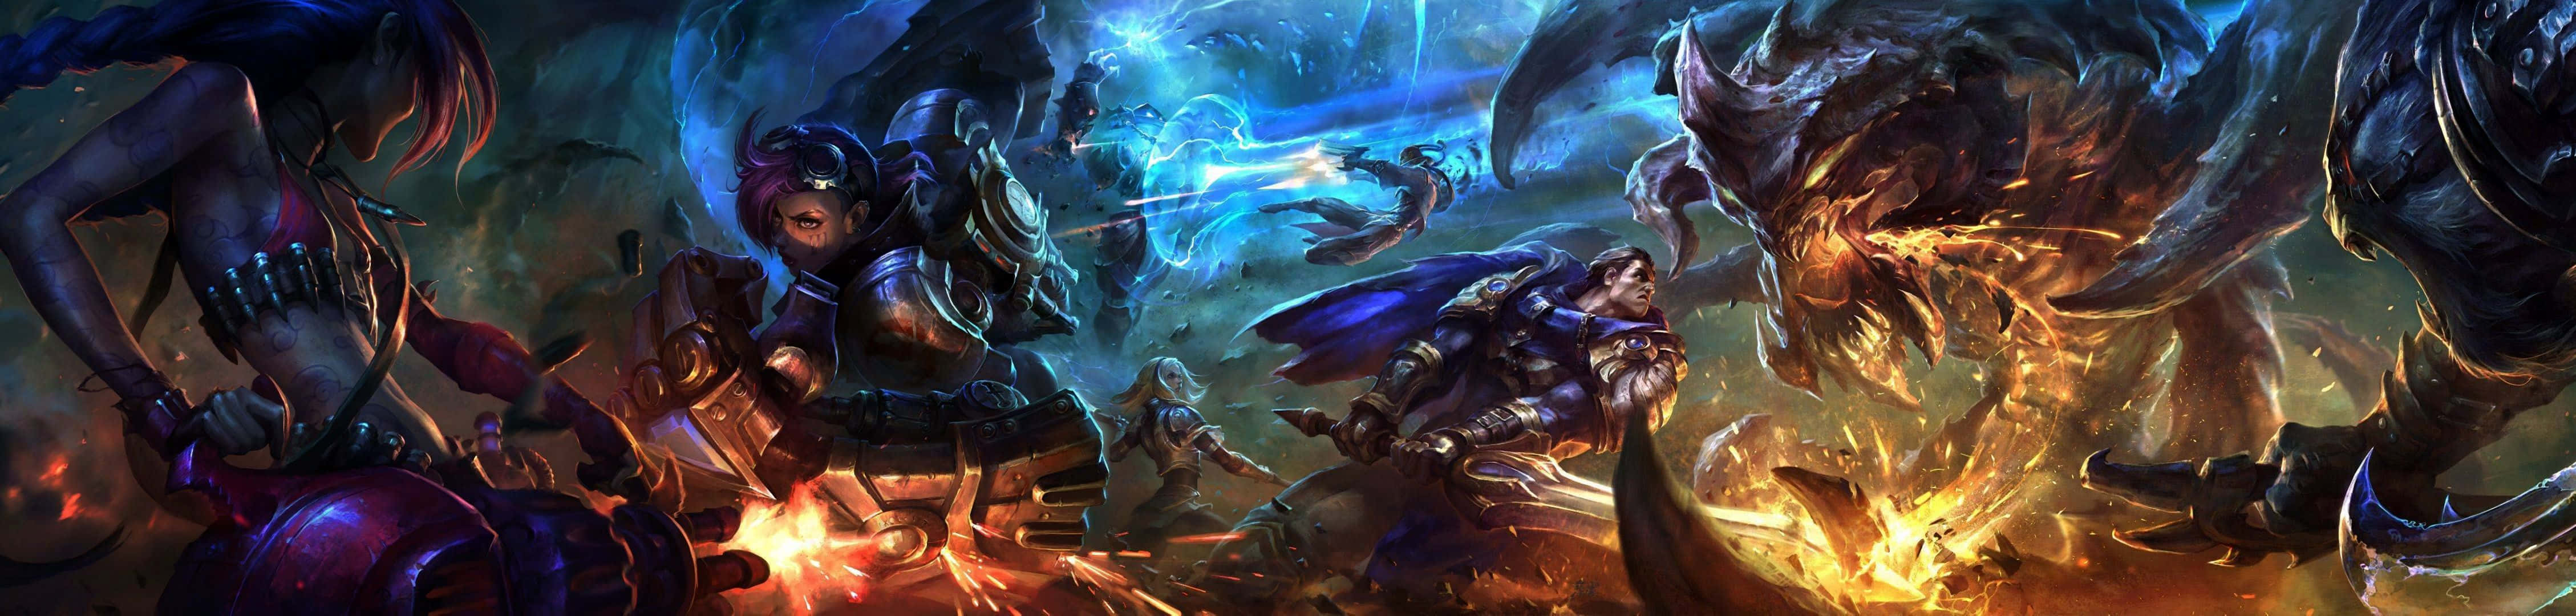 Awesome 3840x1080 League Of Legends Wallpaper